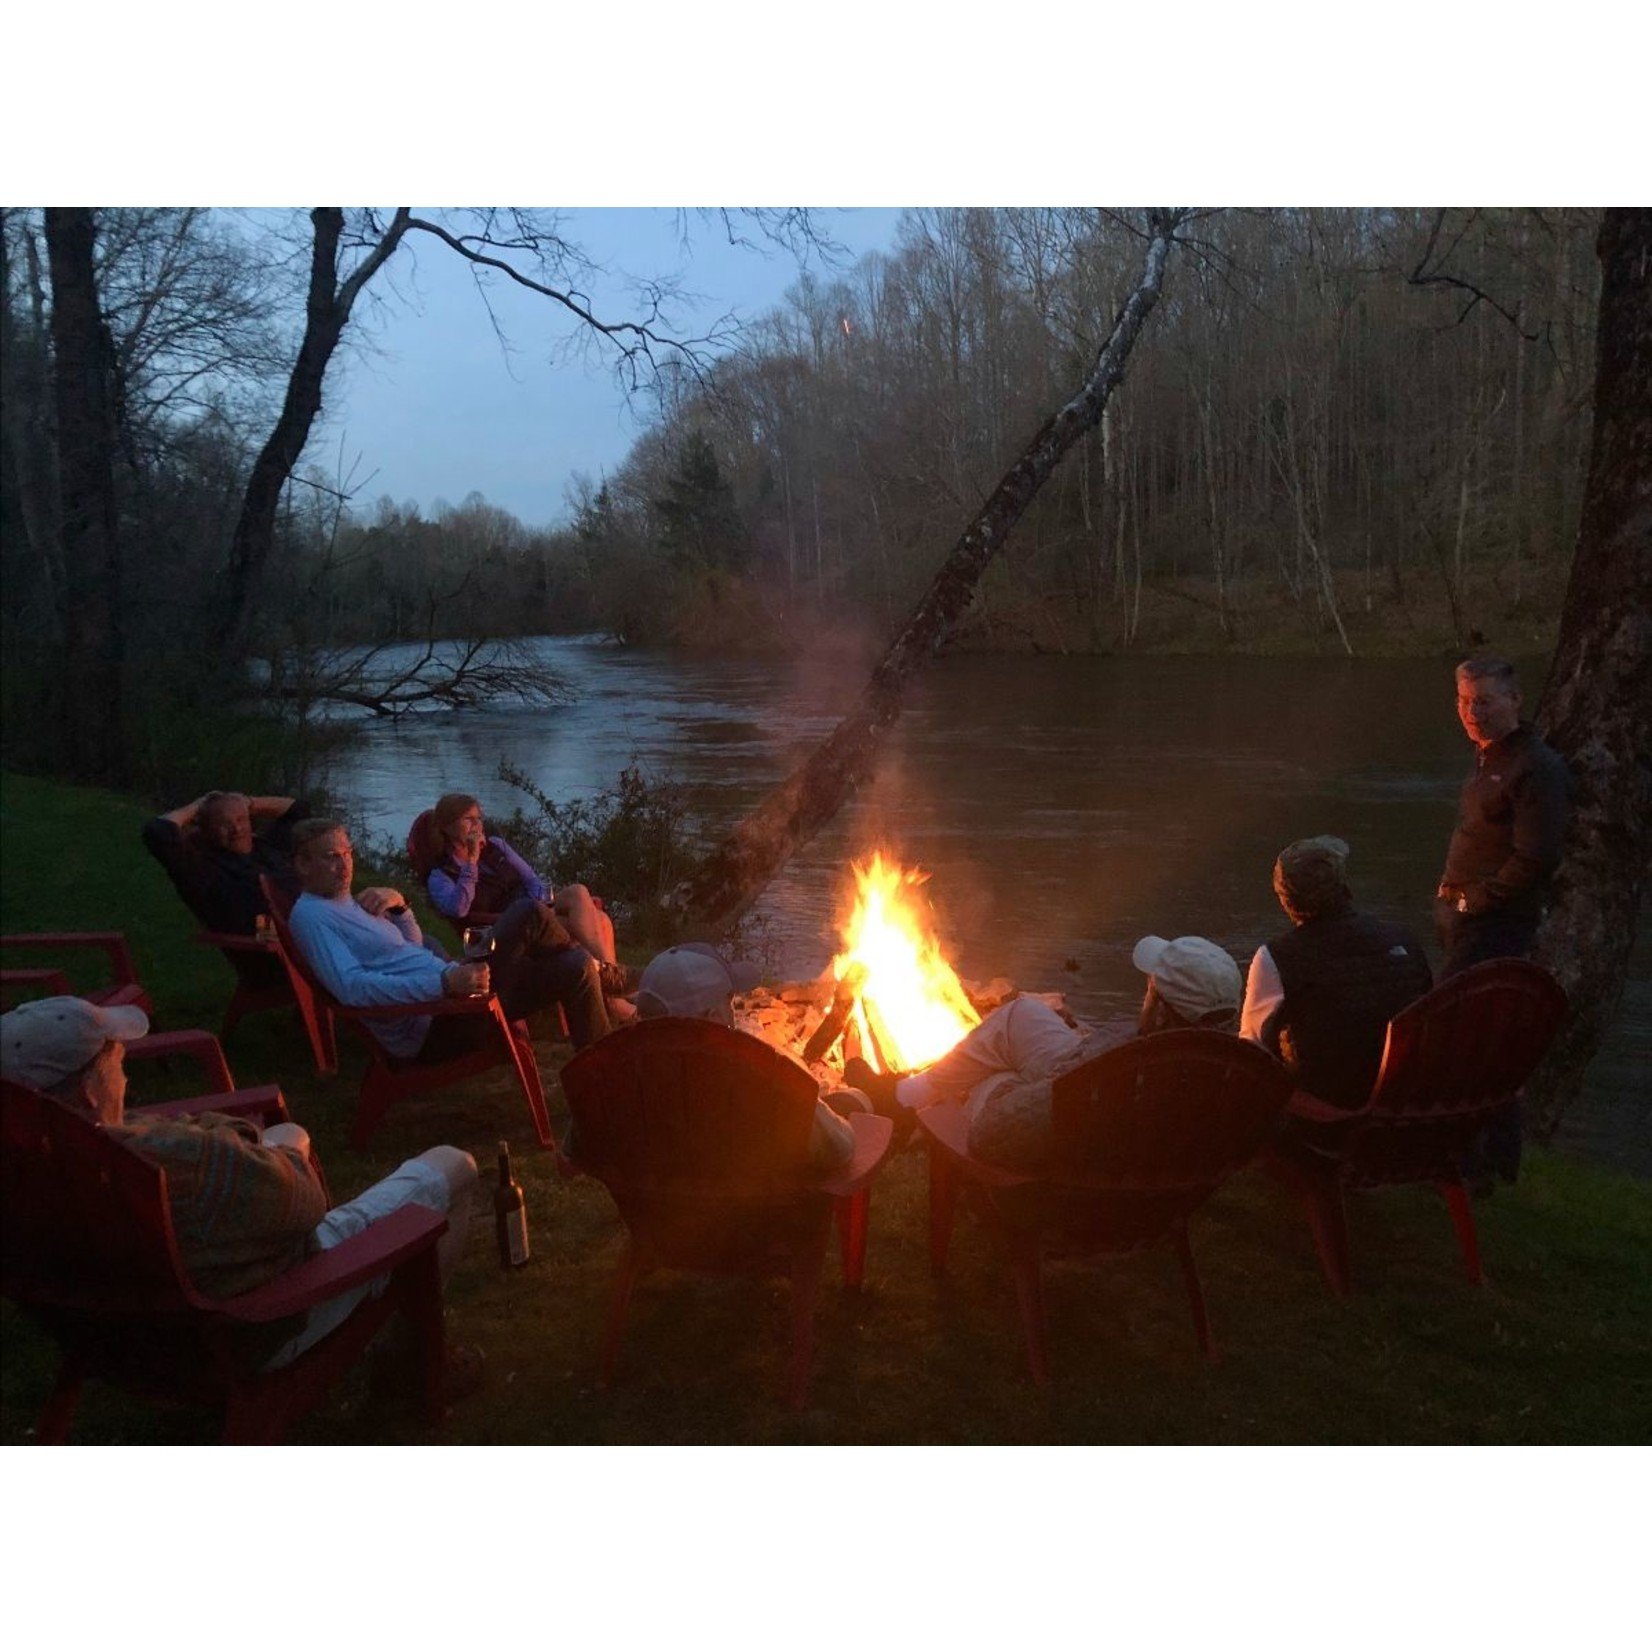 South Holston River Lodge, Tennessee (April 27th - May 2nd)